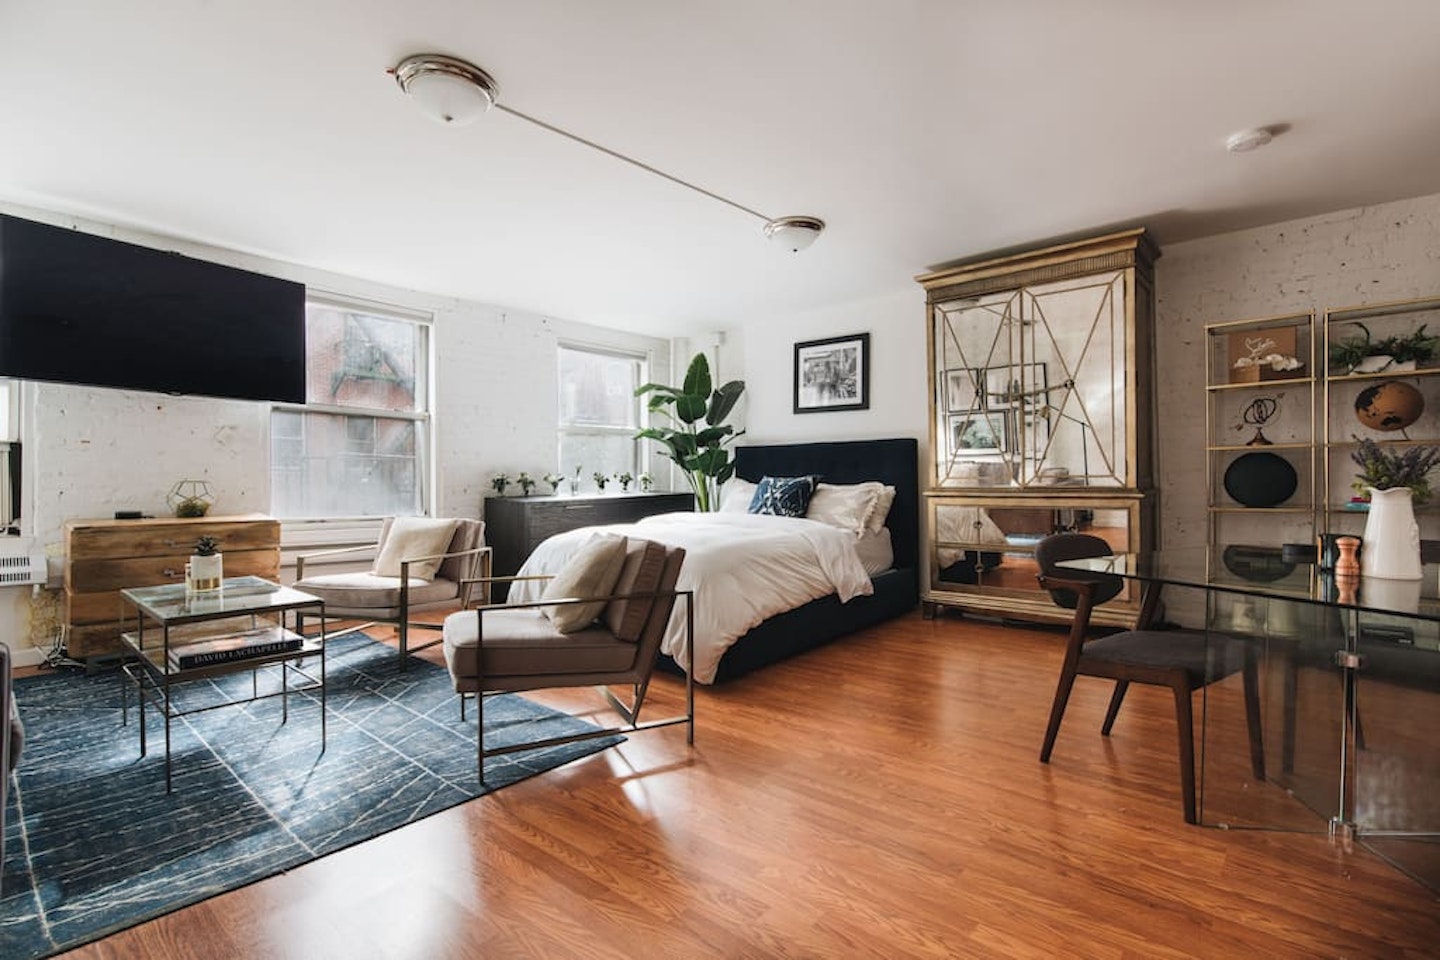 The Best Airbnbs In New York For Interiors Inspiration - Grazia